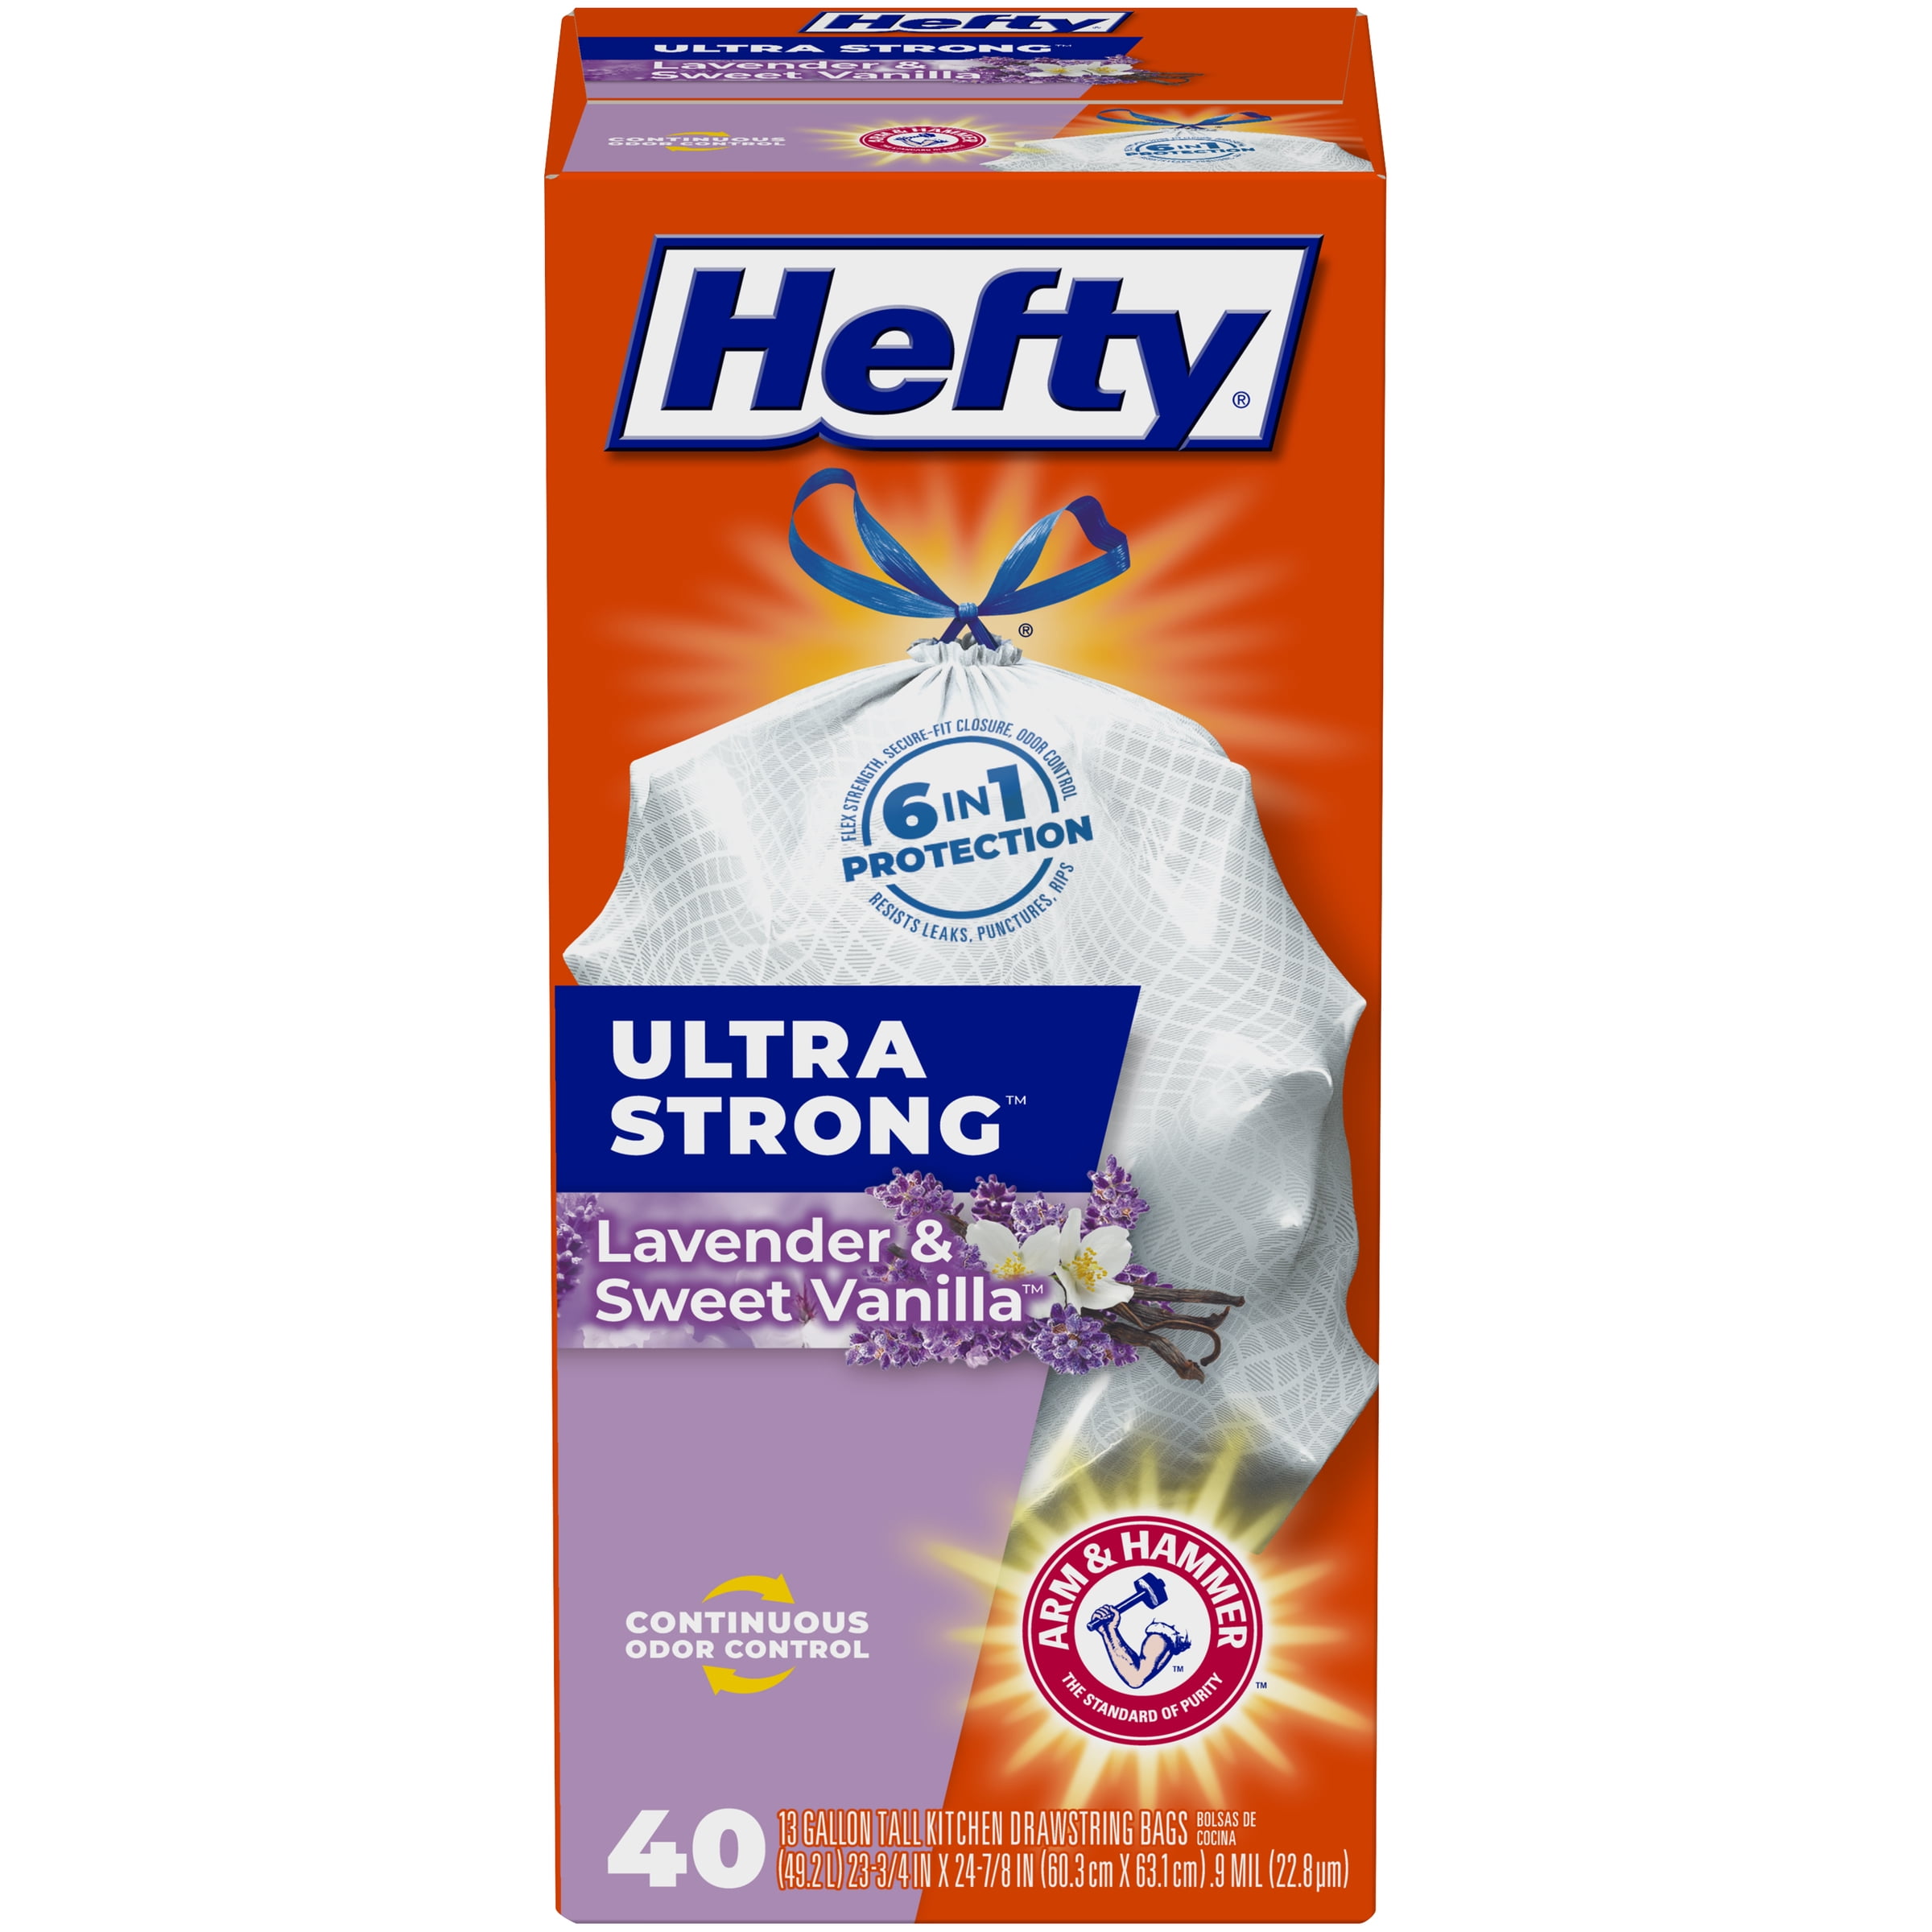 Hefty Ultra Strong Tall Kitchen Trash Bags, Fabuloso Scent, 13 Gallon, 120  Co